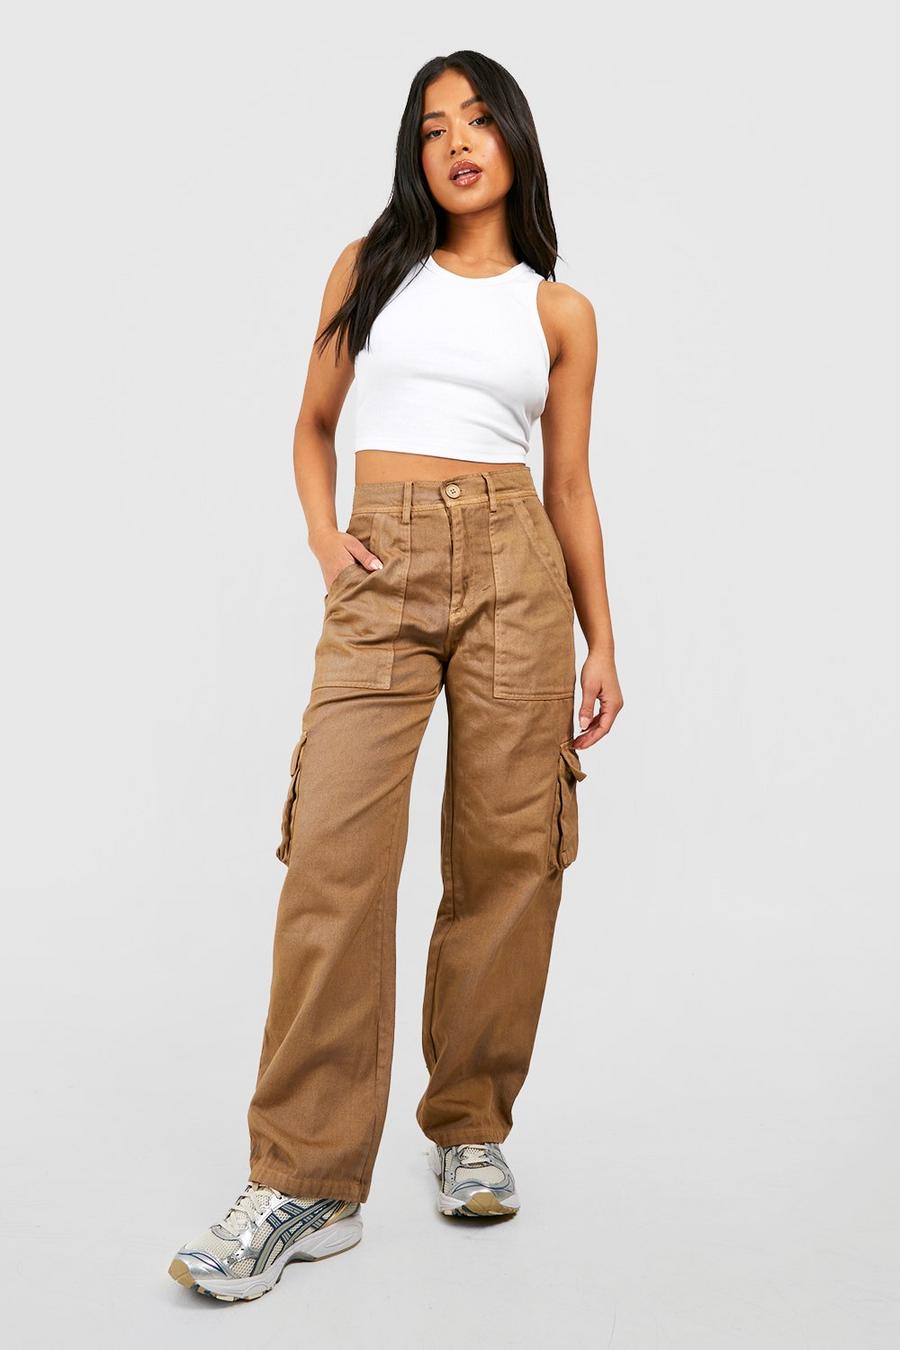 Cargo Pants Women Plus Size Casual Solid Color Comfy Mid Rise Pants for  Women Fashion Loose Fit Daily Straight Lightweight Party Vacation Beach  Pants